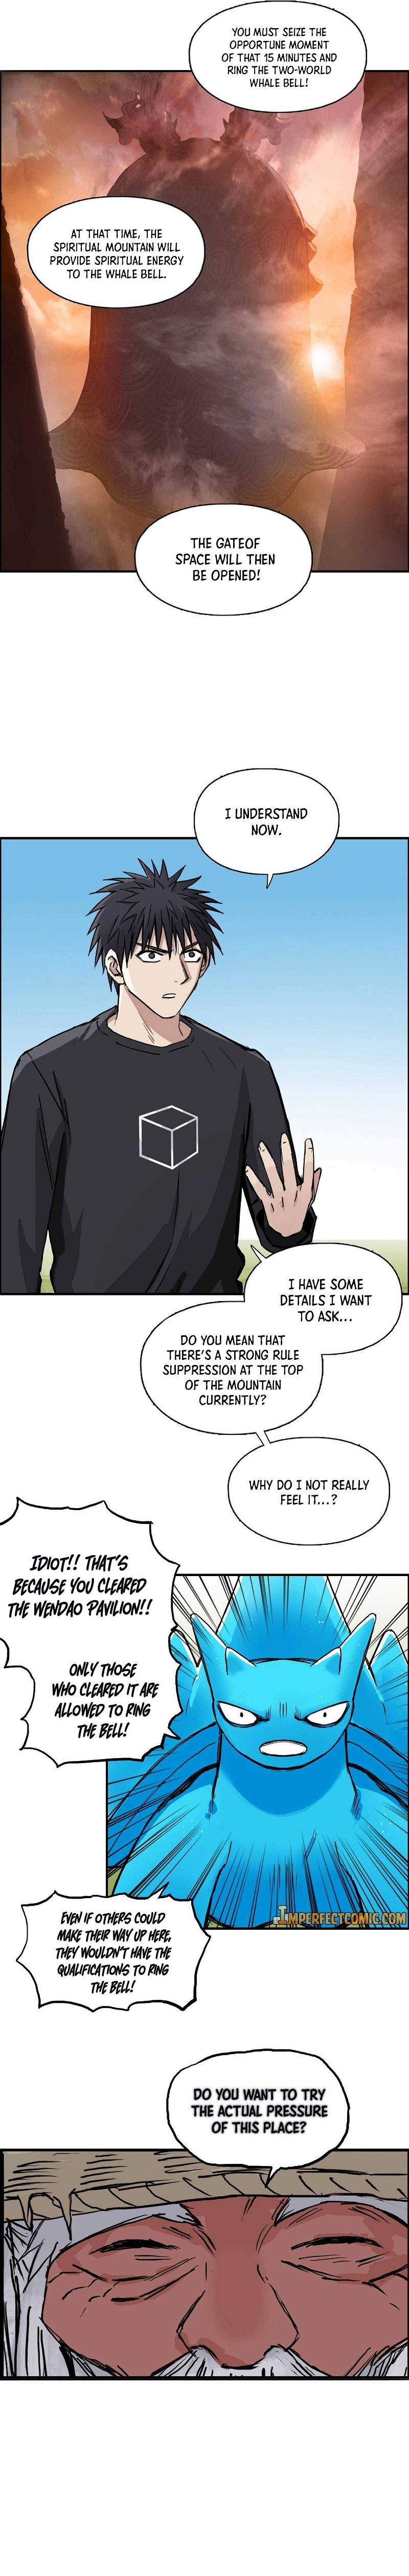 Super Cube Chapter 225 page 6